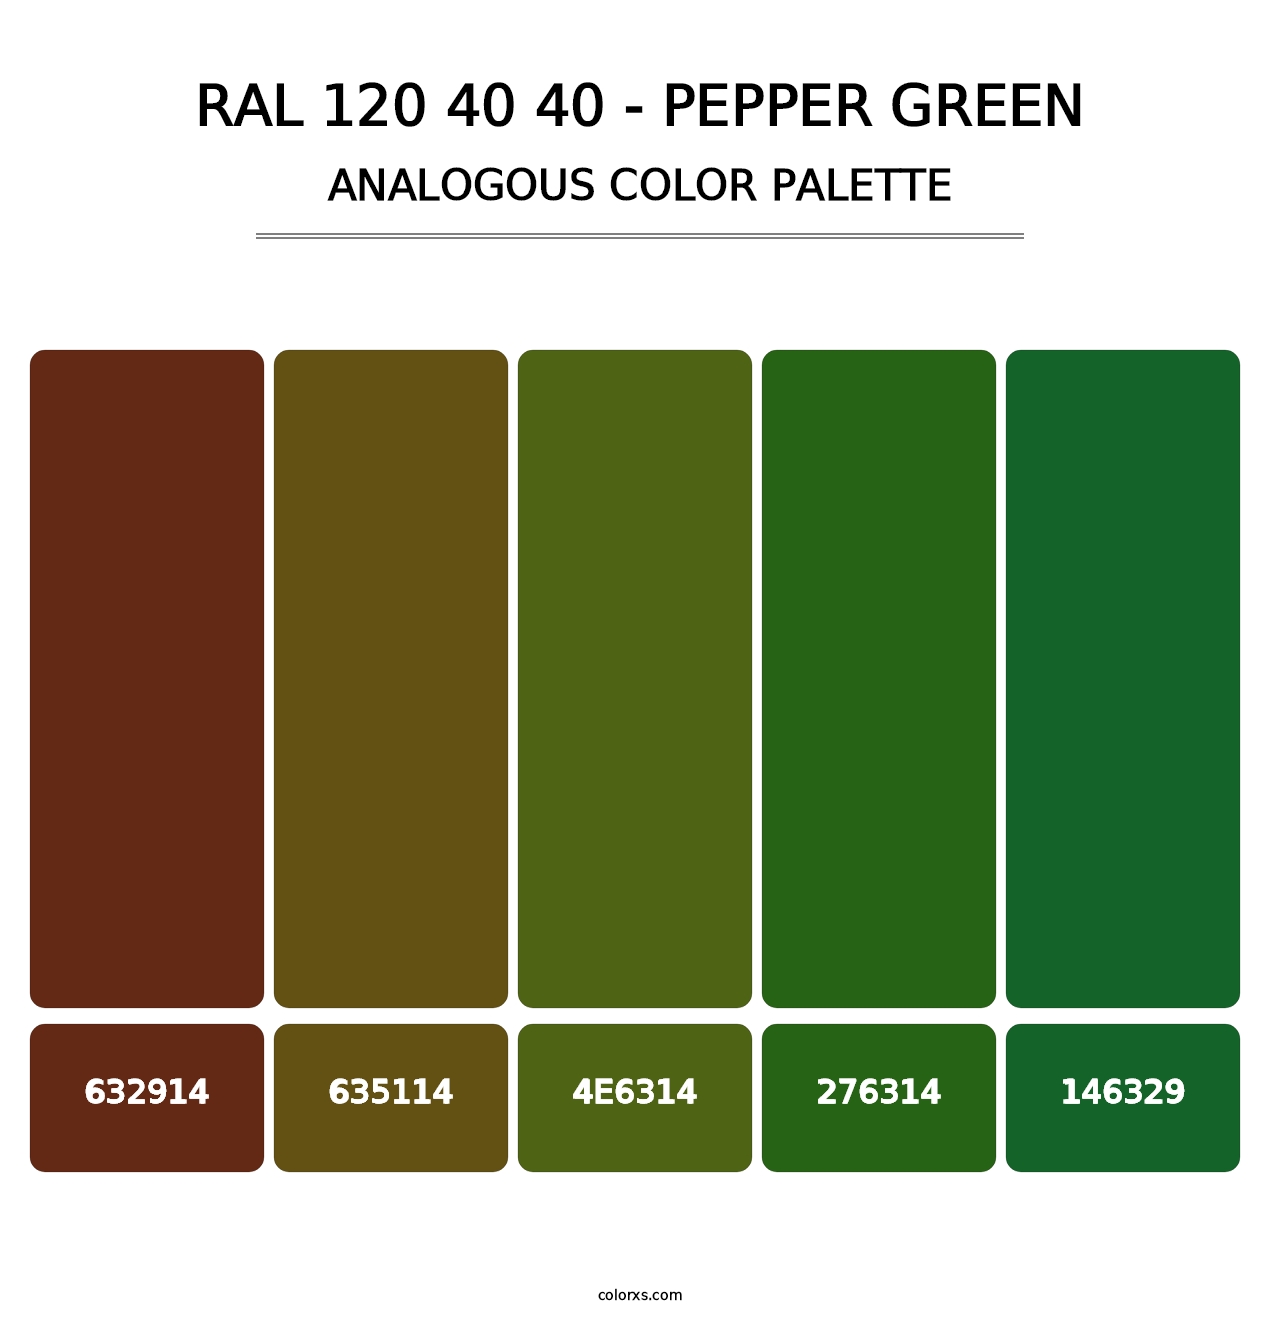 RAL 120 40 40 - Pepper Green - Analogous Color Palette